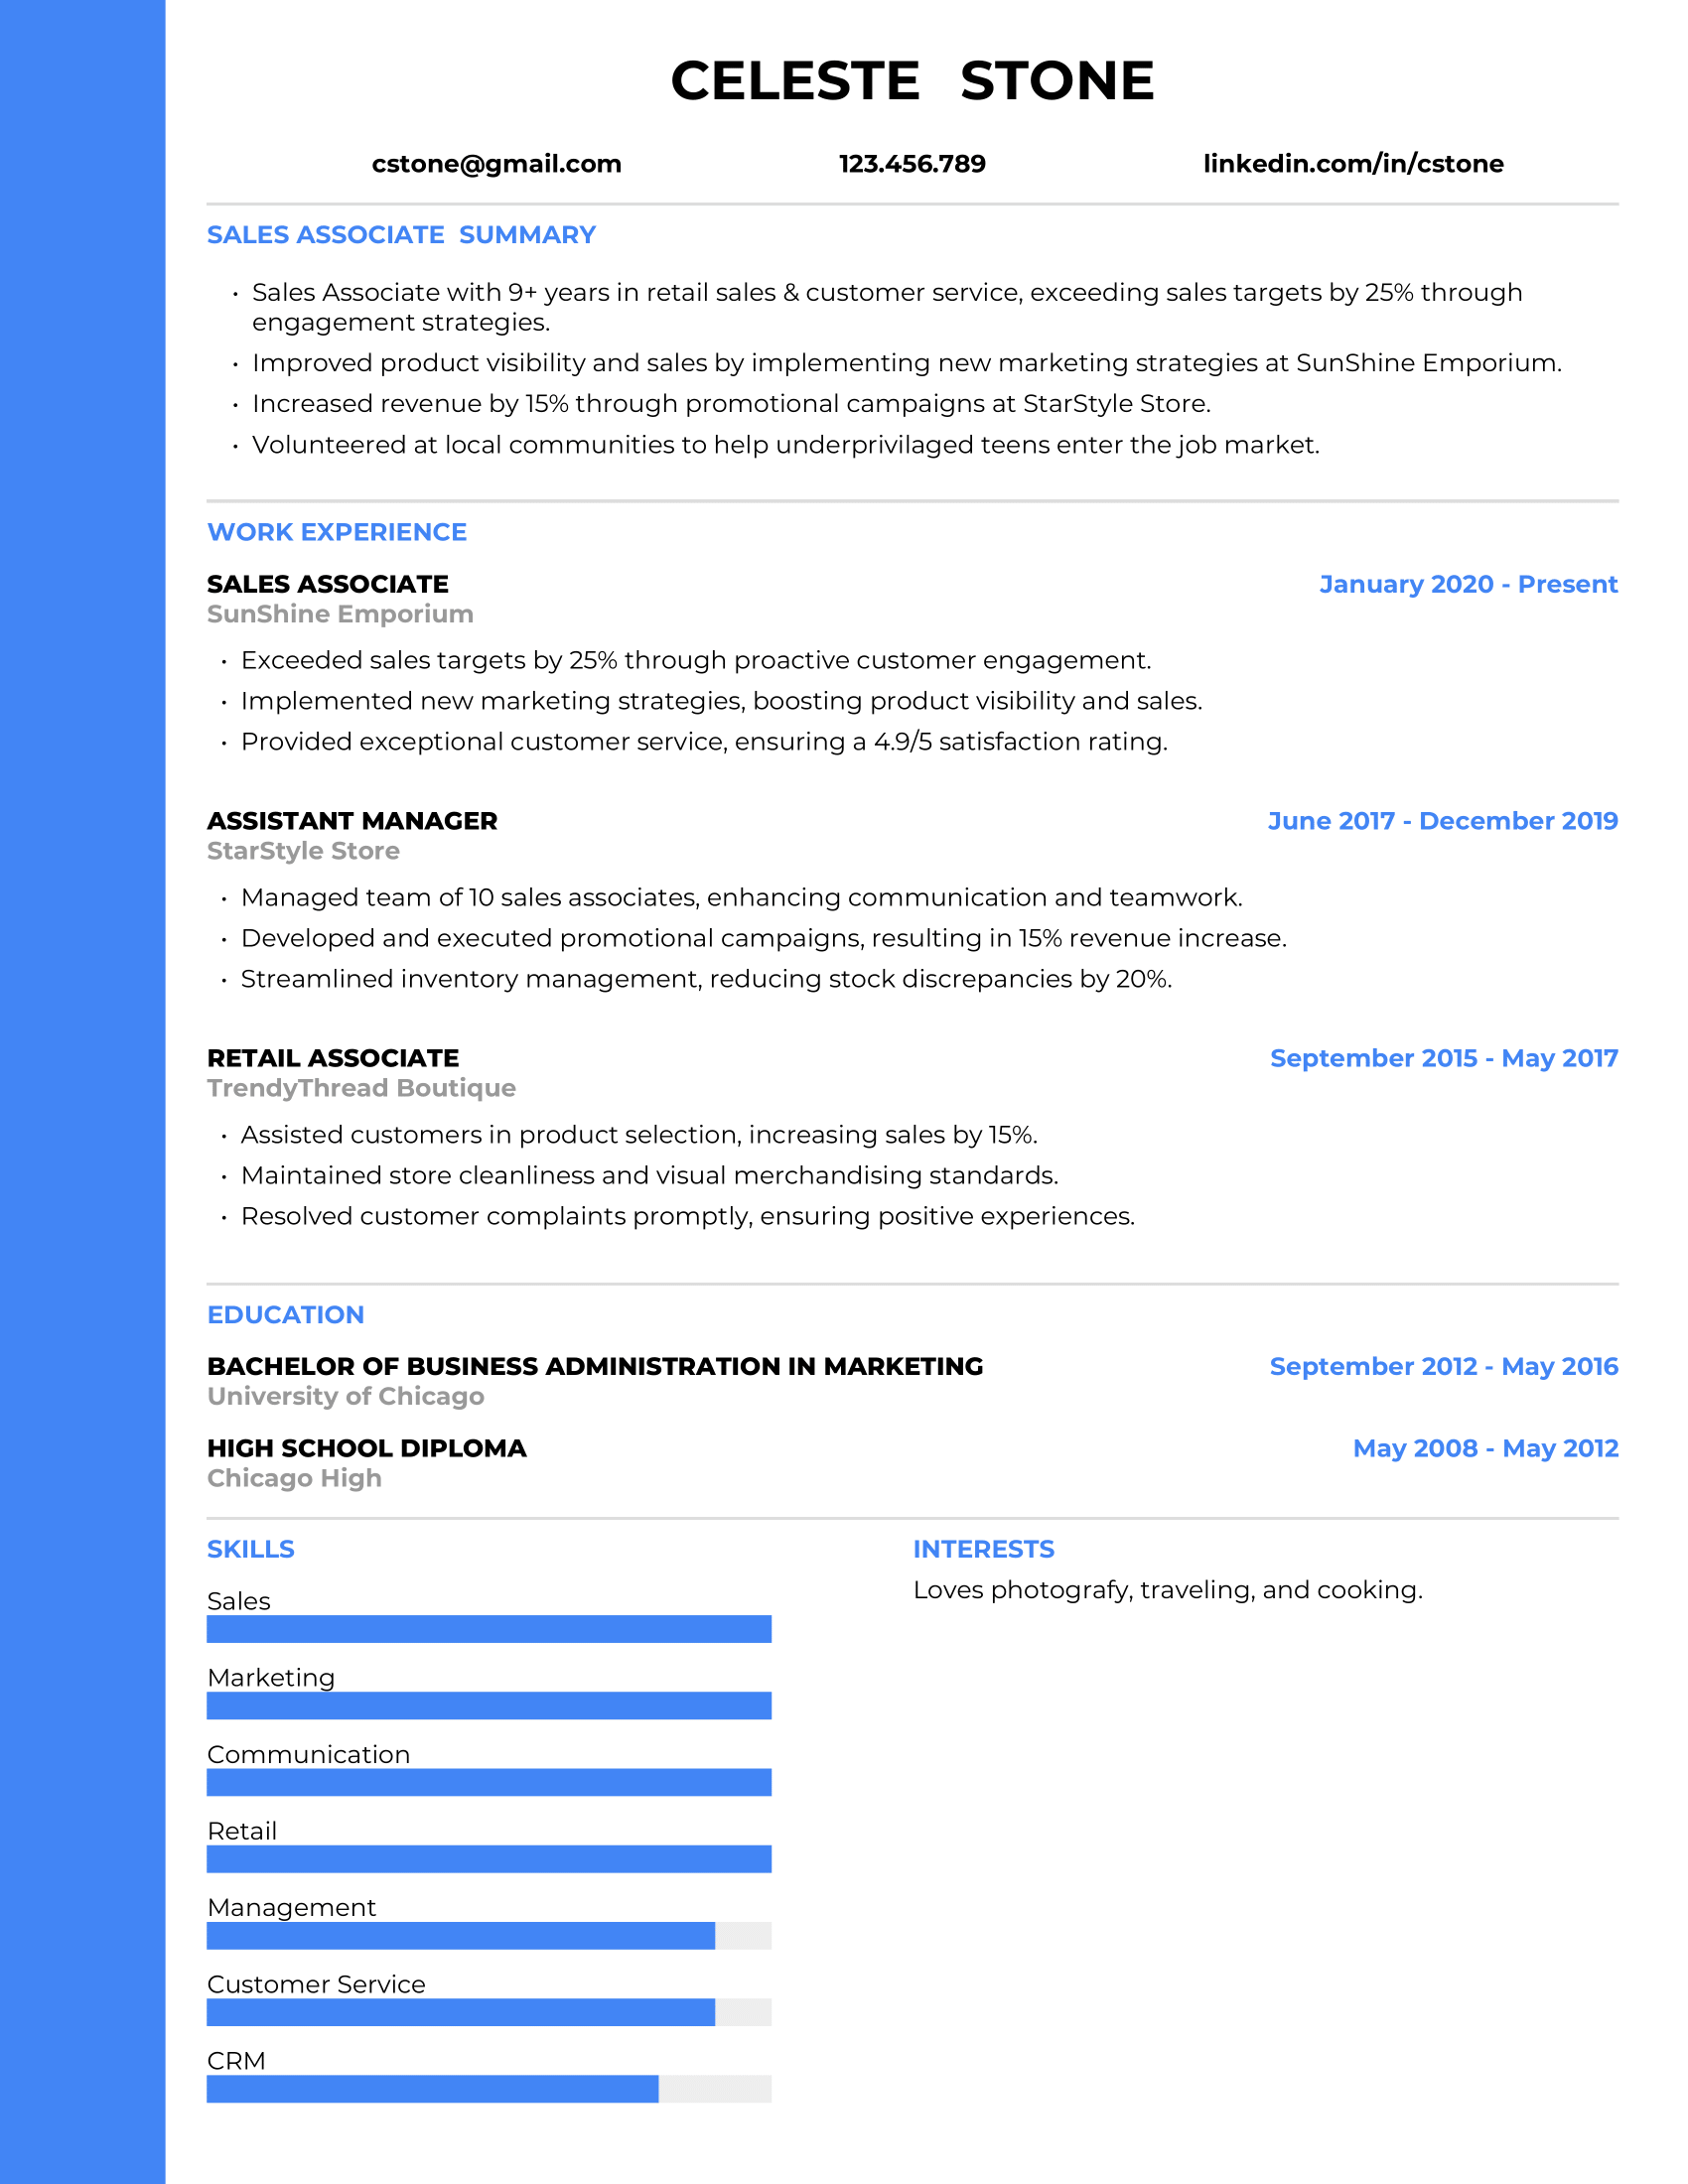 Sales Associate Resume Example #1 - Traditional